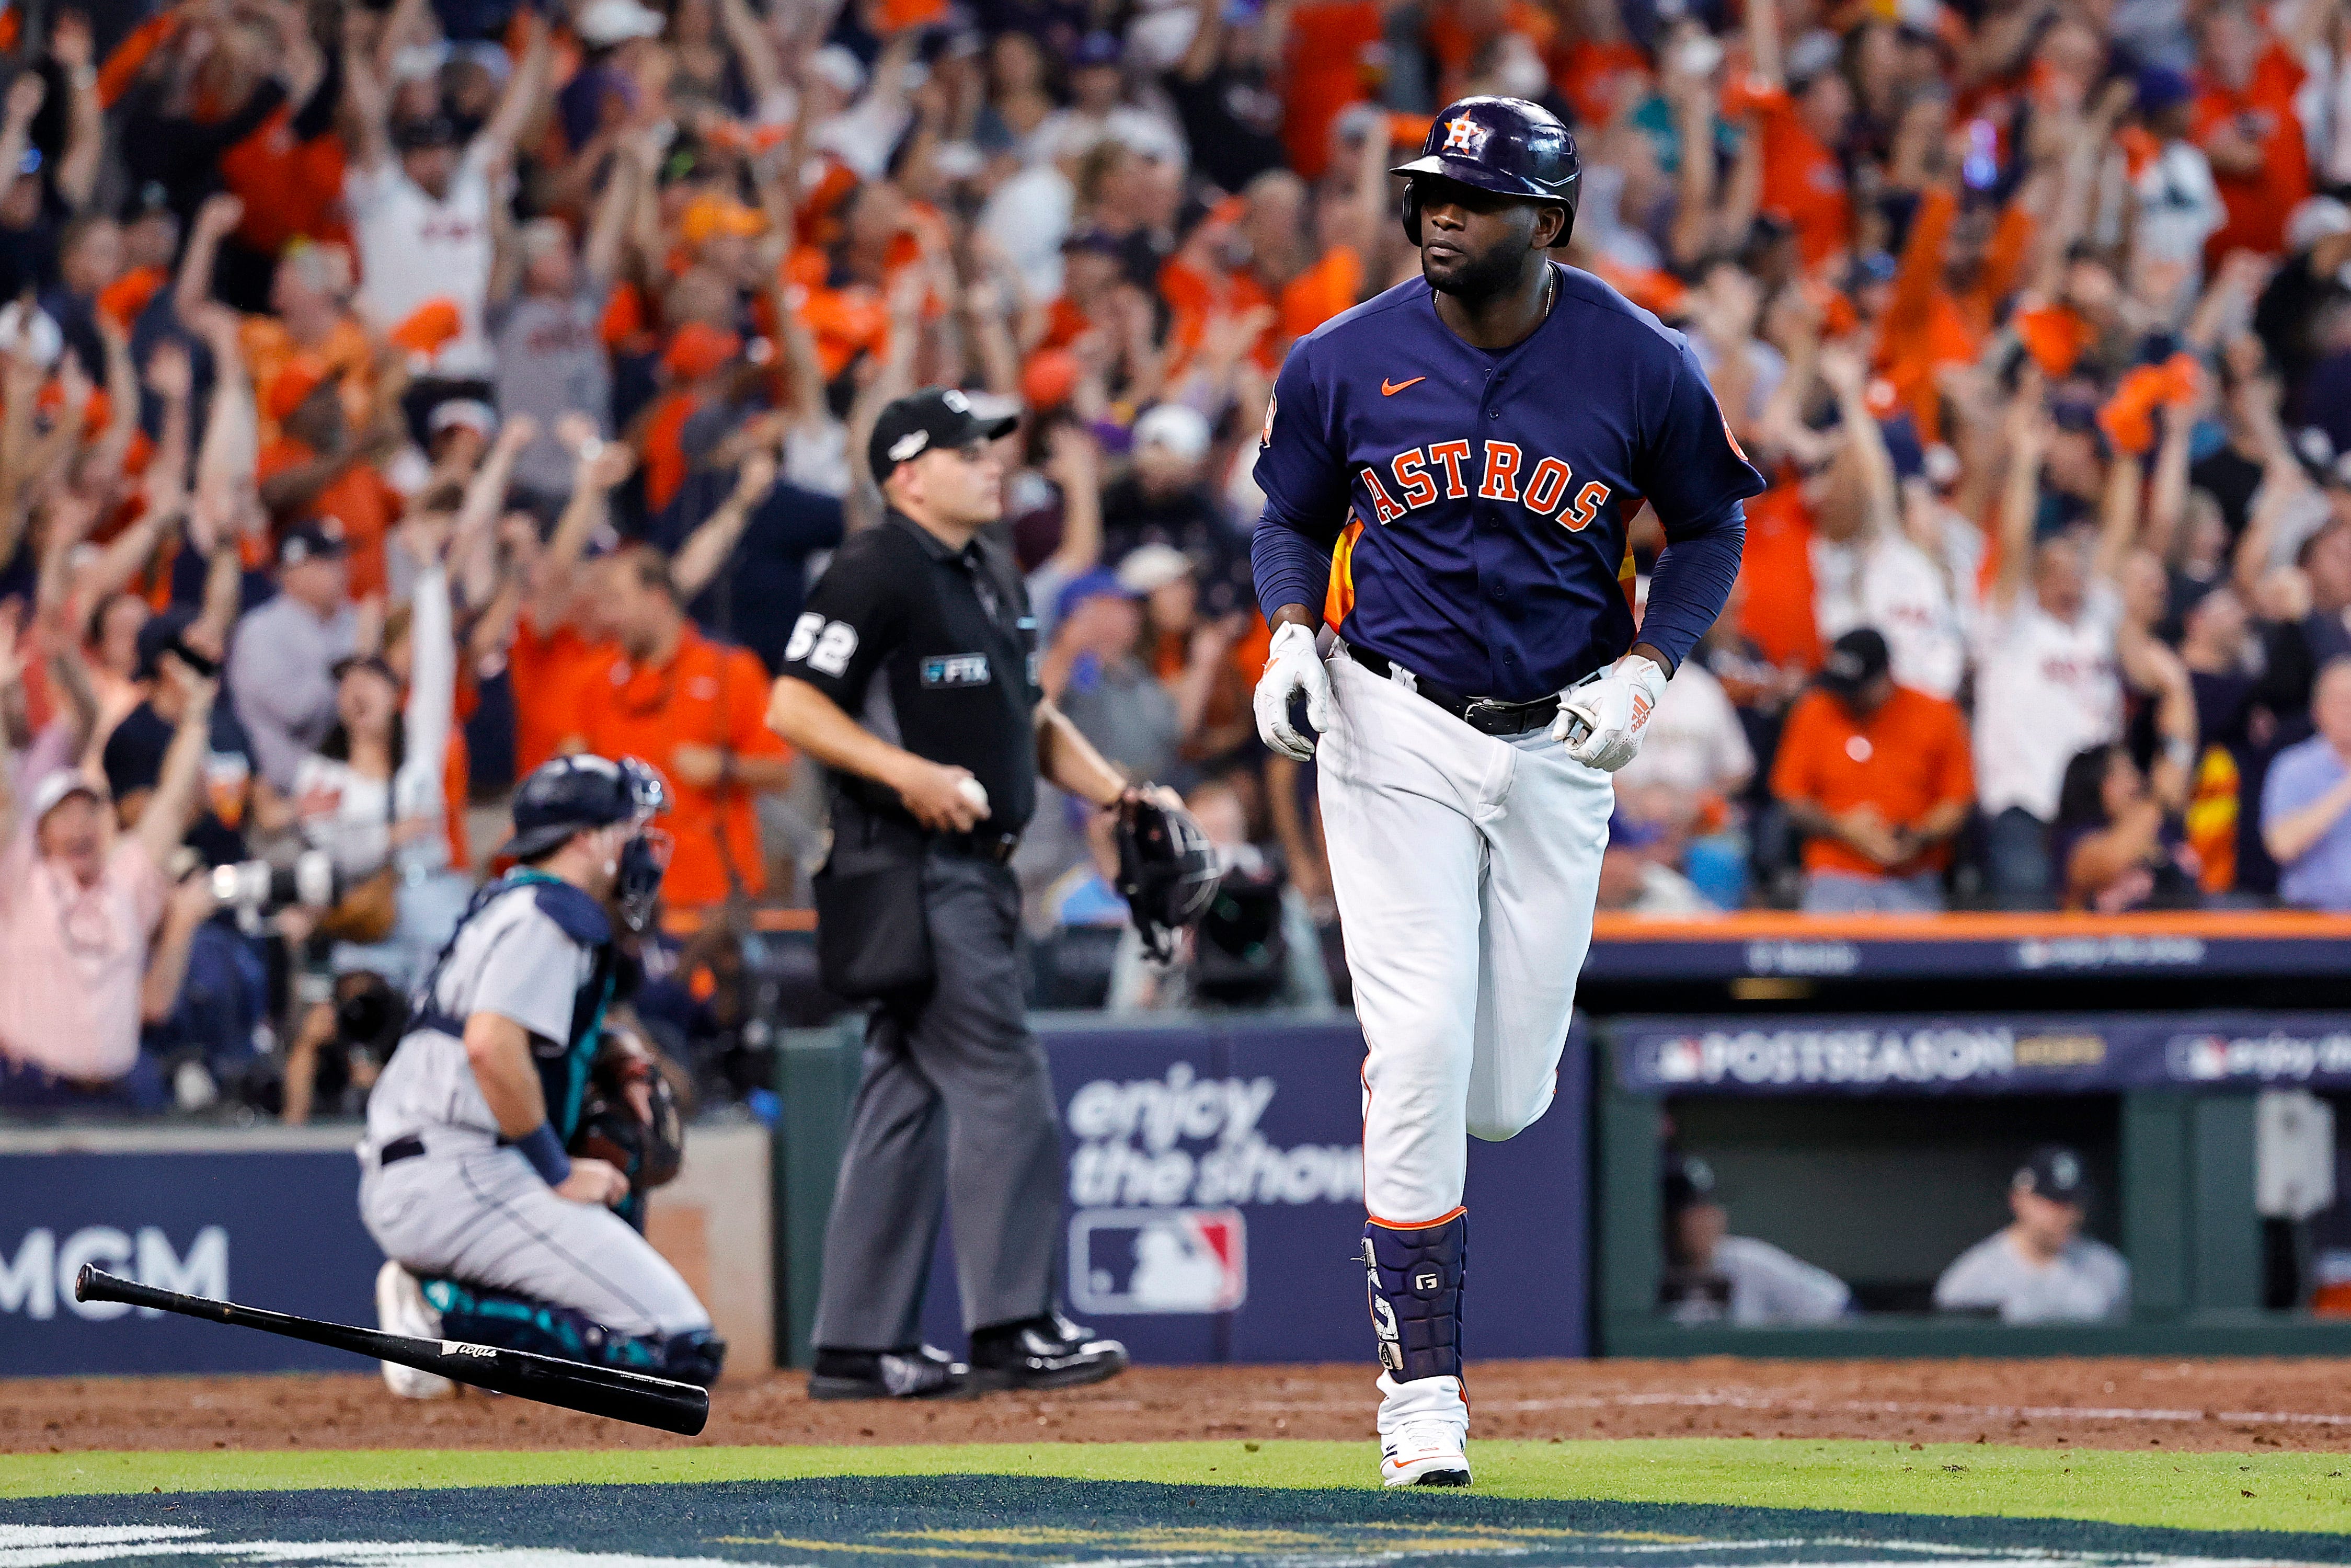 The Astros and Dodgers broke the game of baseball into a million